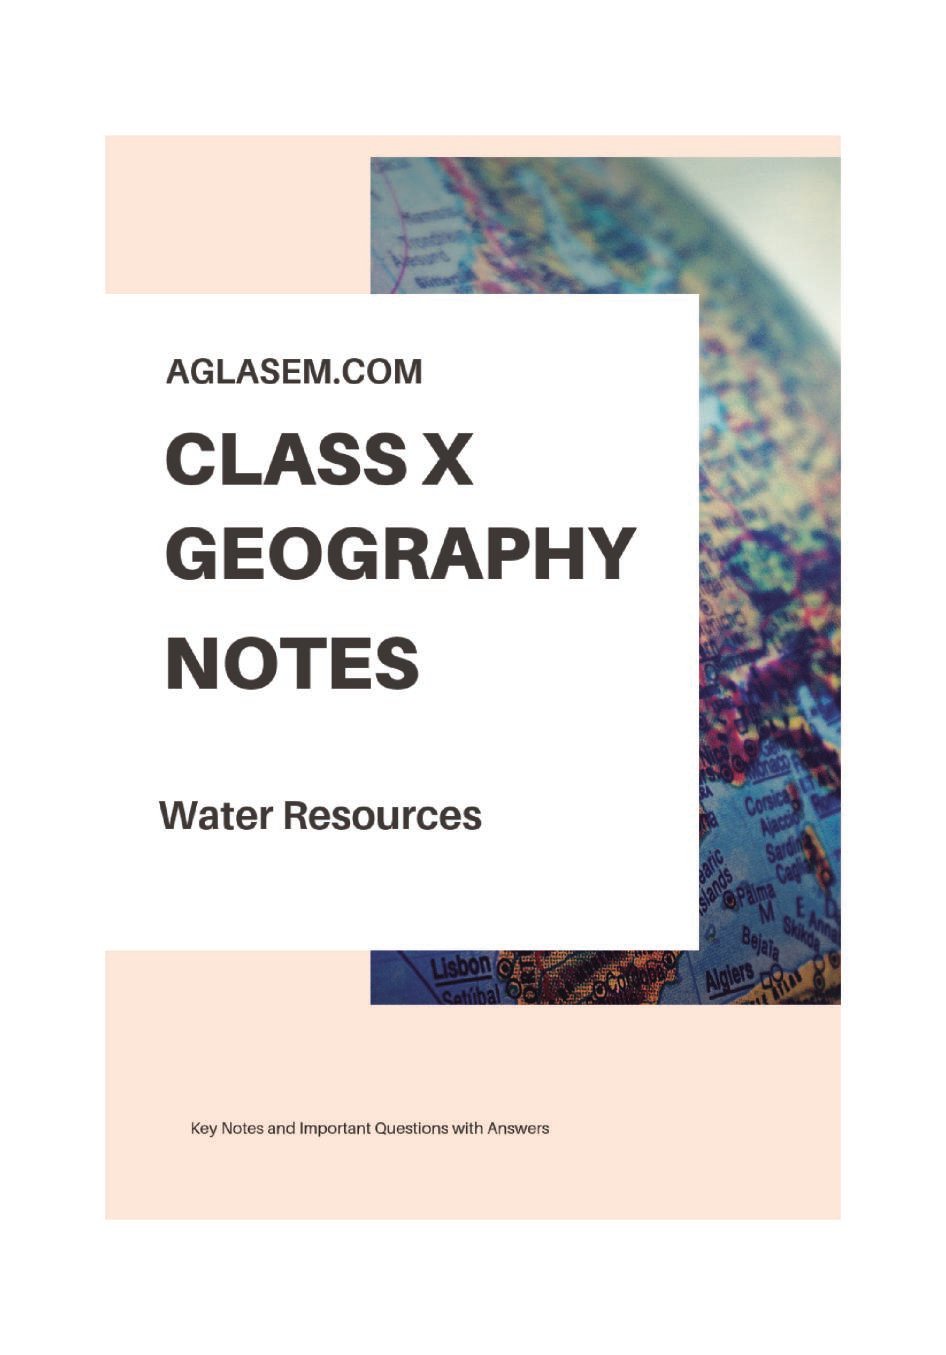 Class 10 Social Science Geography Notes for Water Resources - Page 1